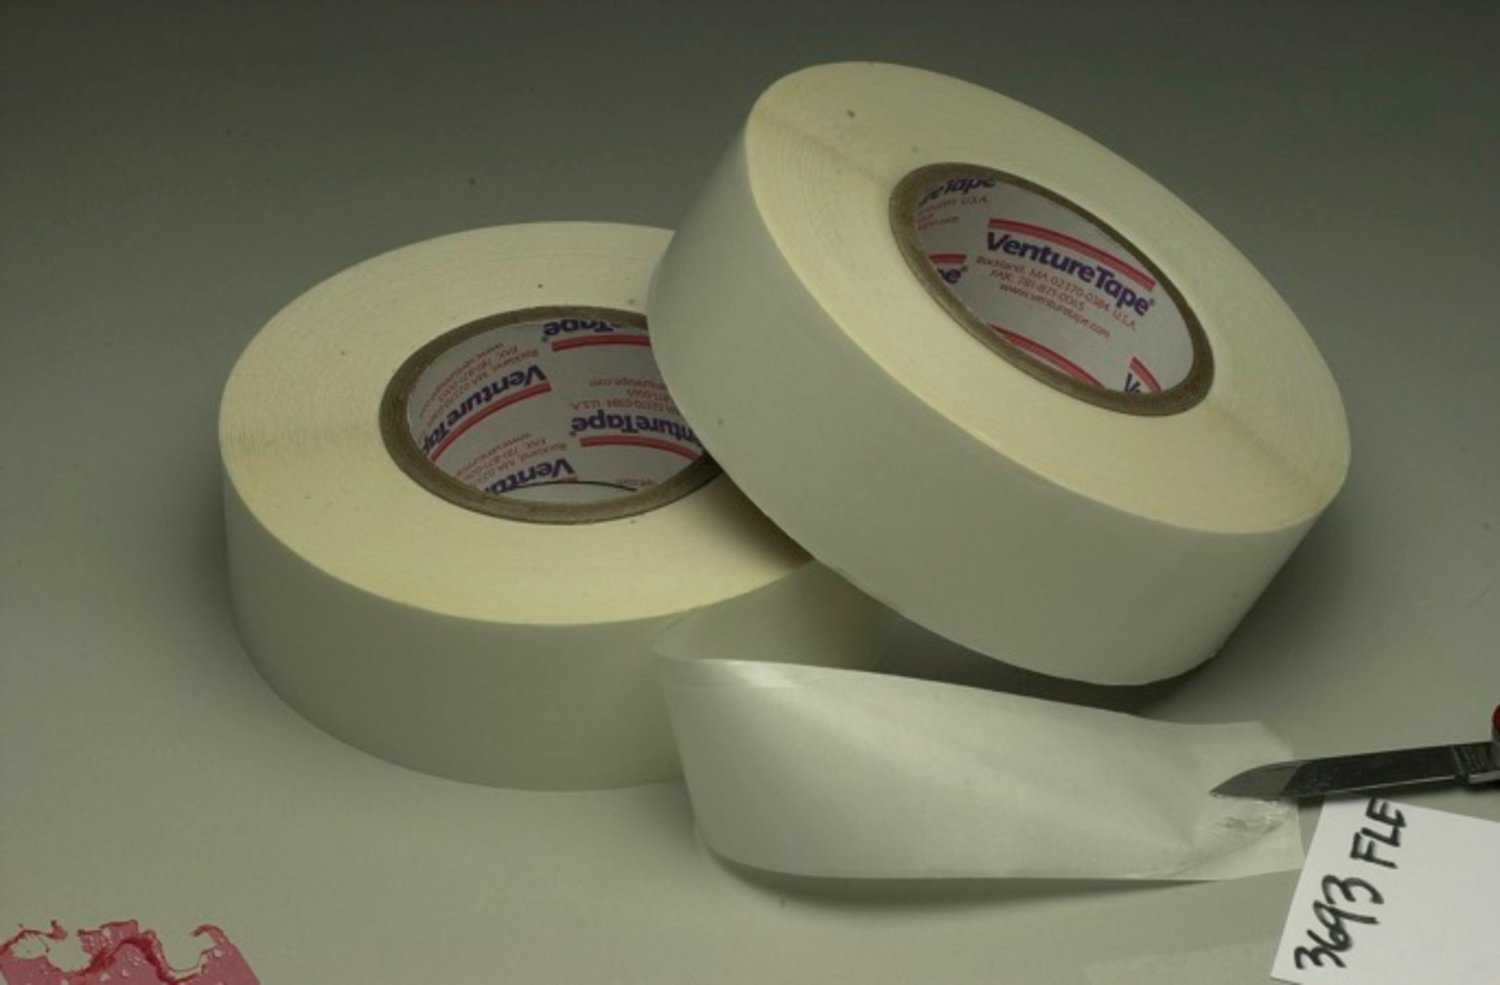 7100043889 - 3M Venture Tape Double Coated Nylon Tape 3693FLE, Right Hand, 1.5 in x 200 yd, 8 Rolls/Case